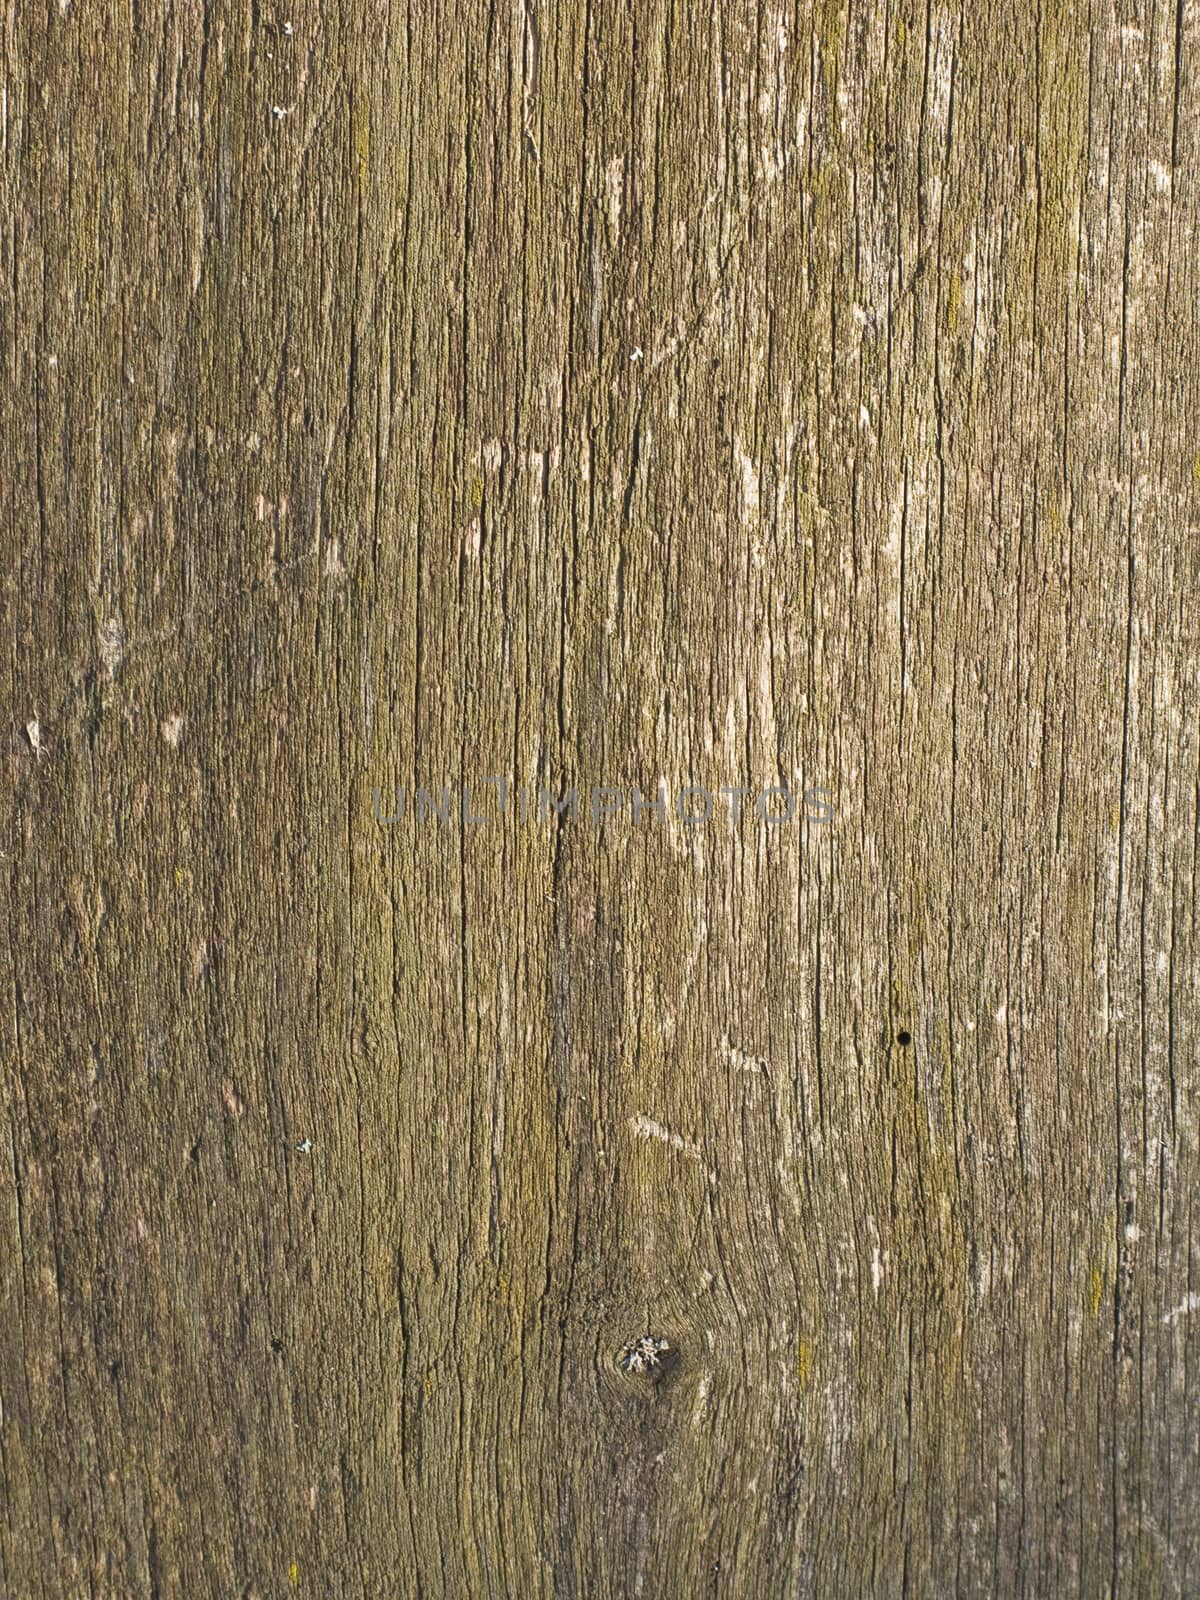 Old weathered natural wooden background by wander